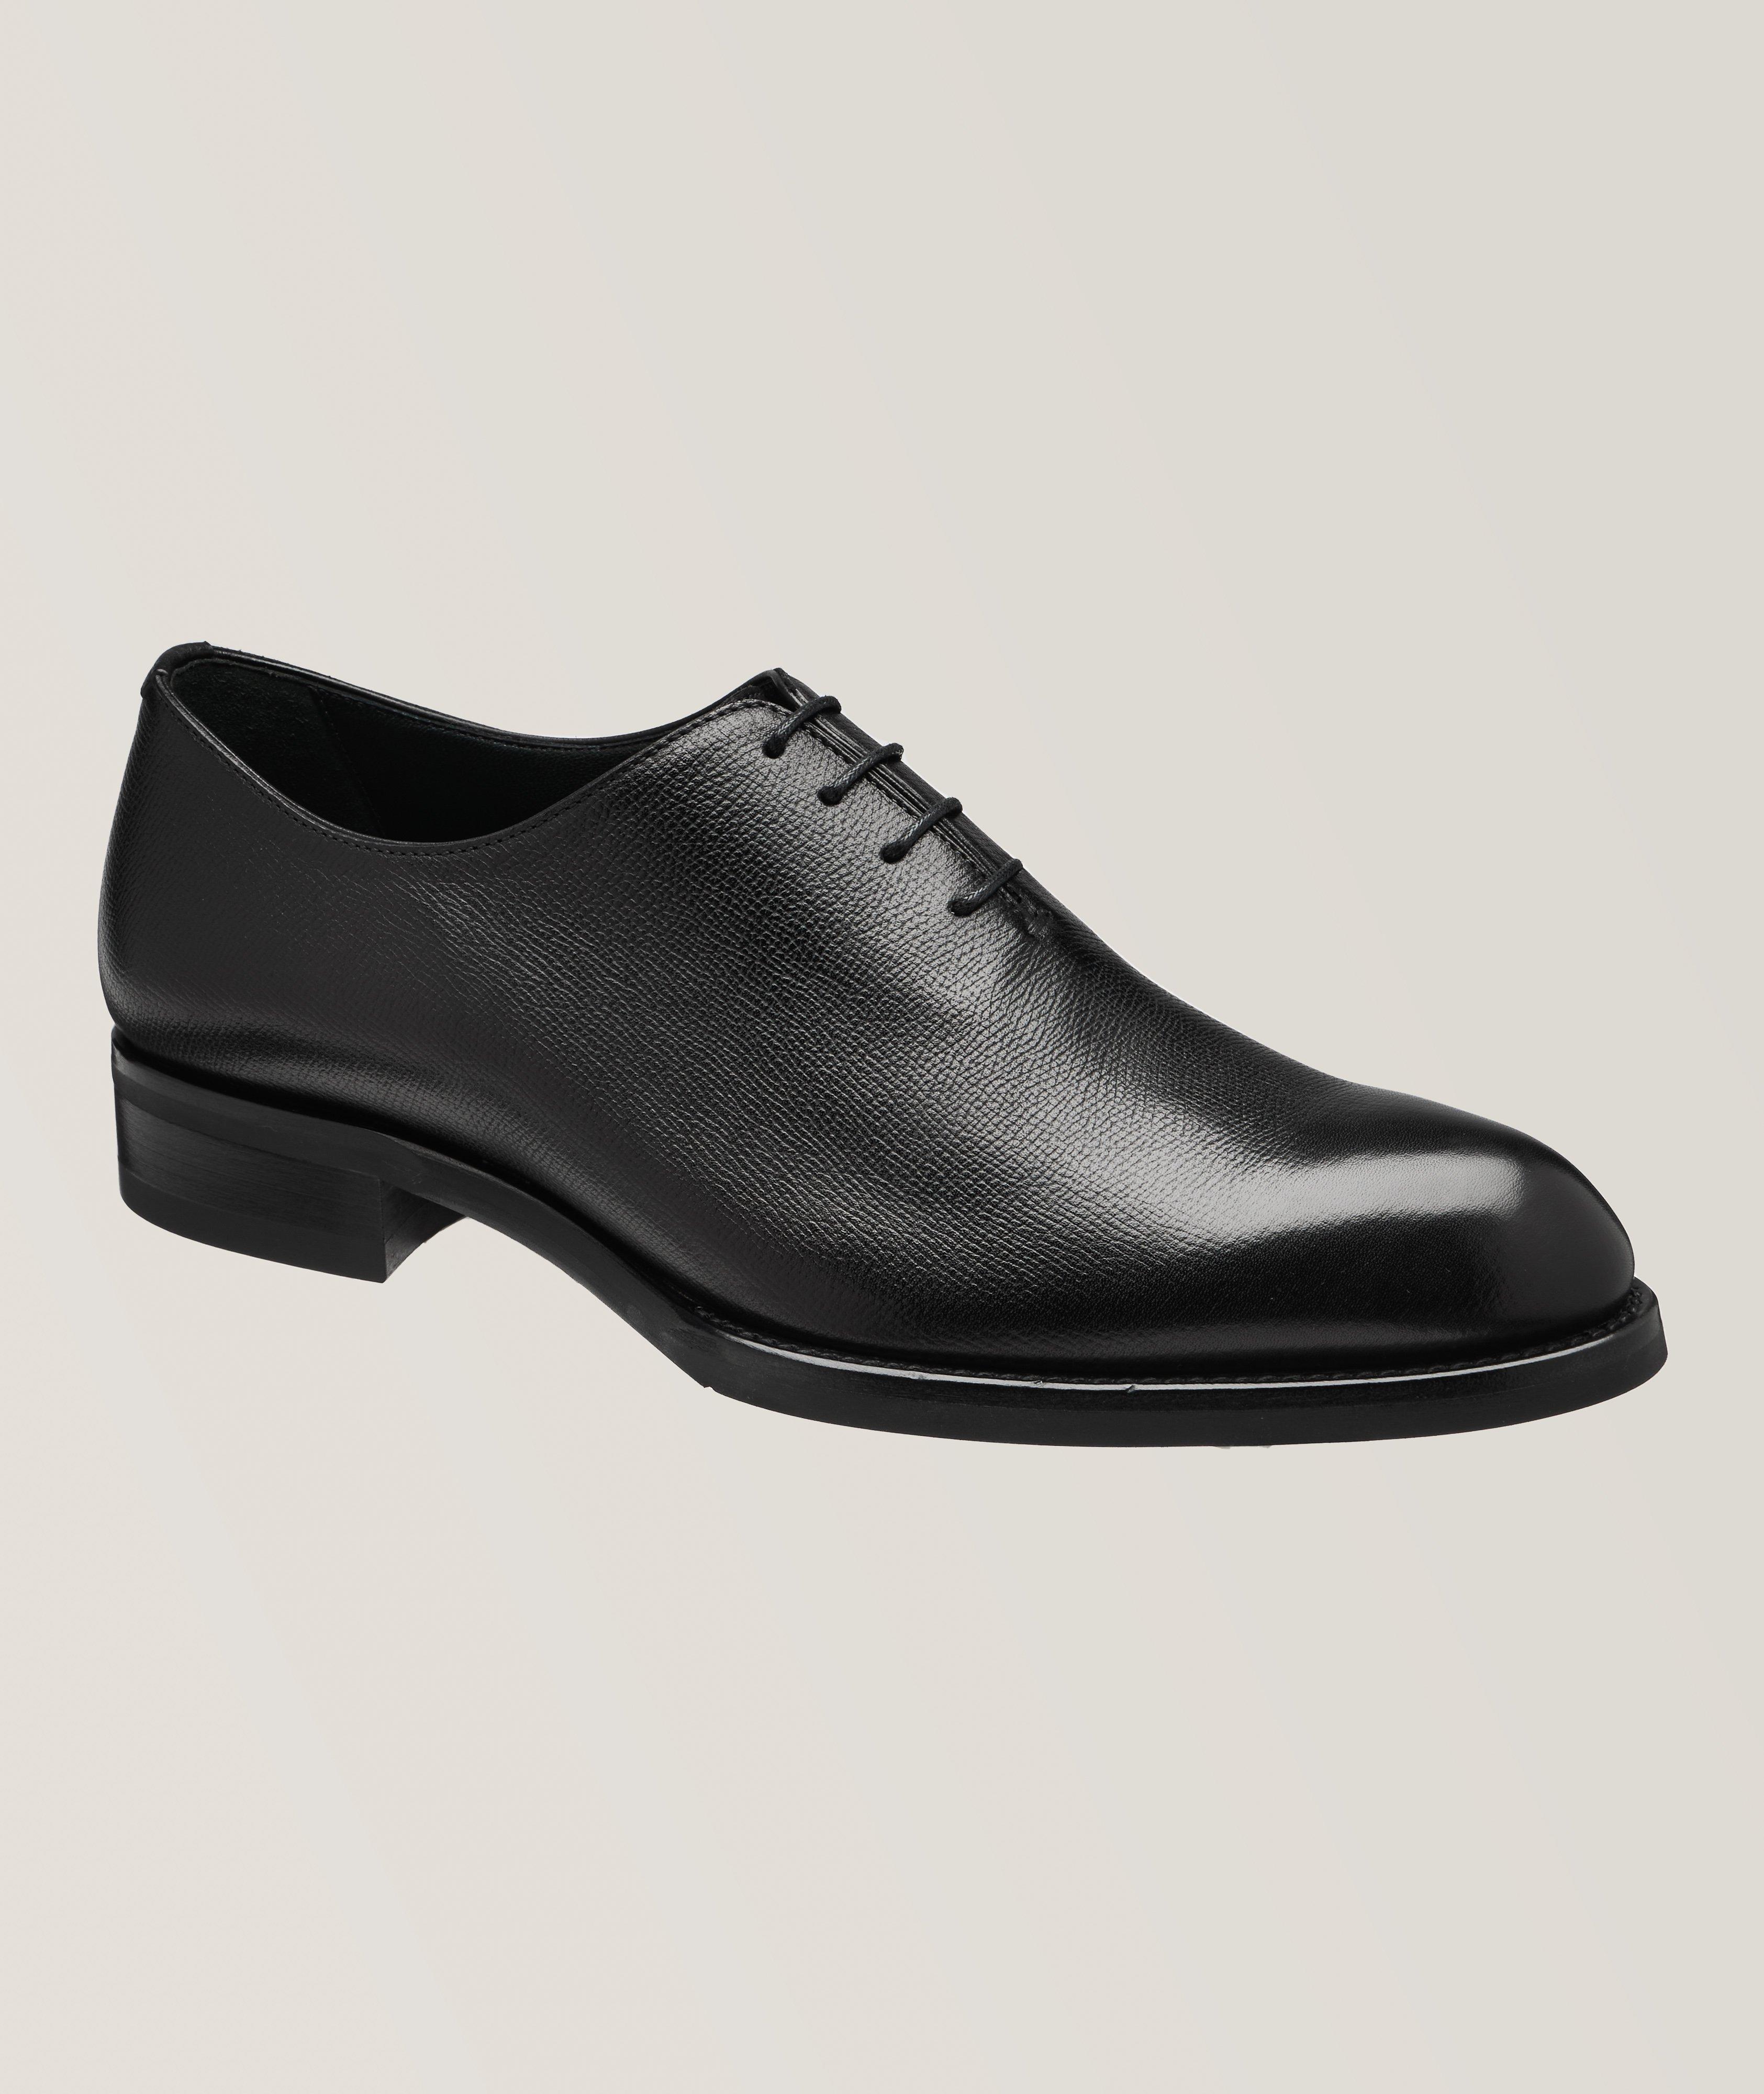 Textured Leather Oxfords image 0